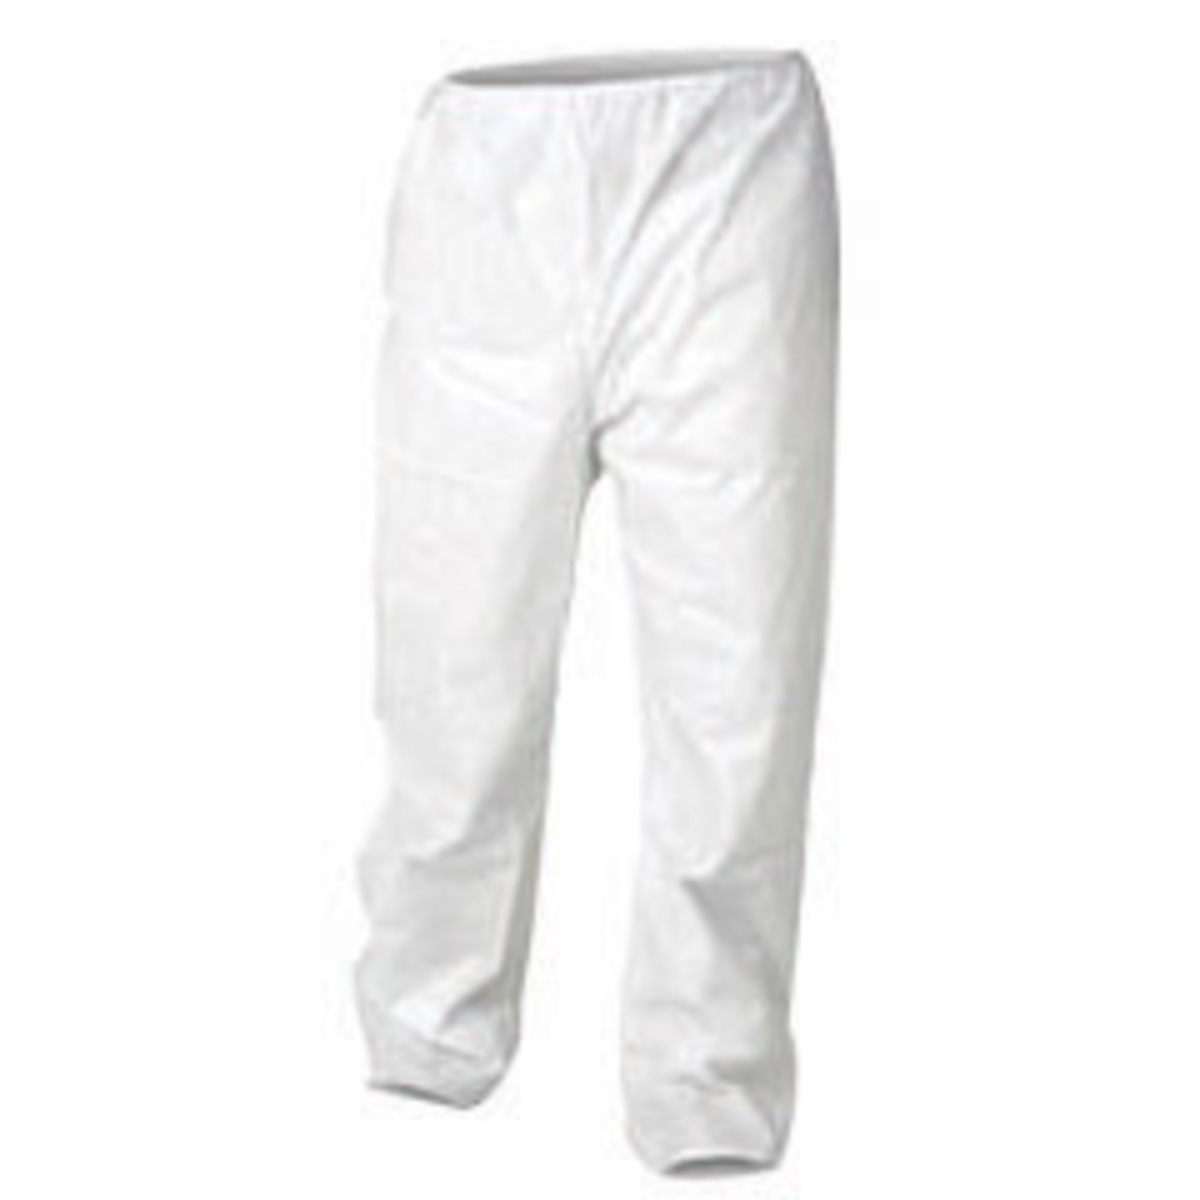 Kimberly-Clark Professional* X-Large White KleenGuard™ A20 SMS Disposable Pants (Availability restrictions apply.)